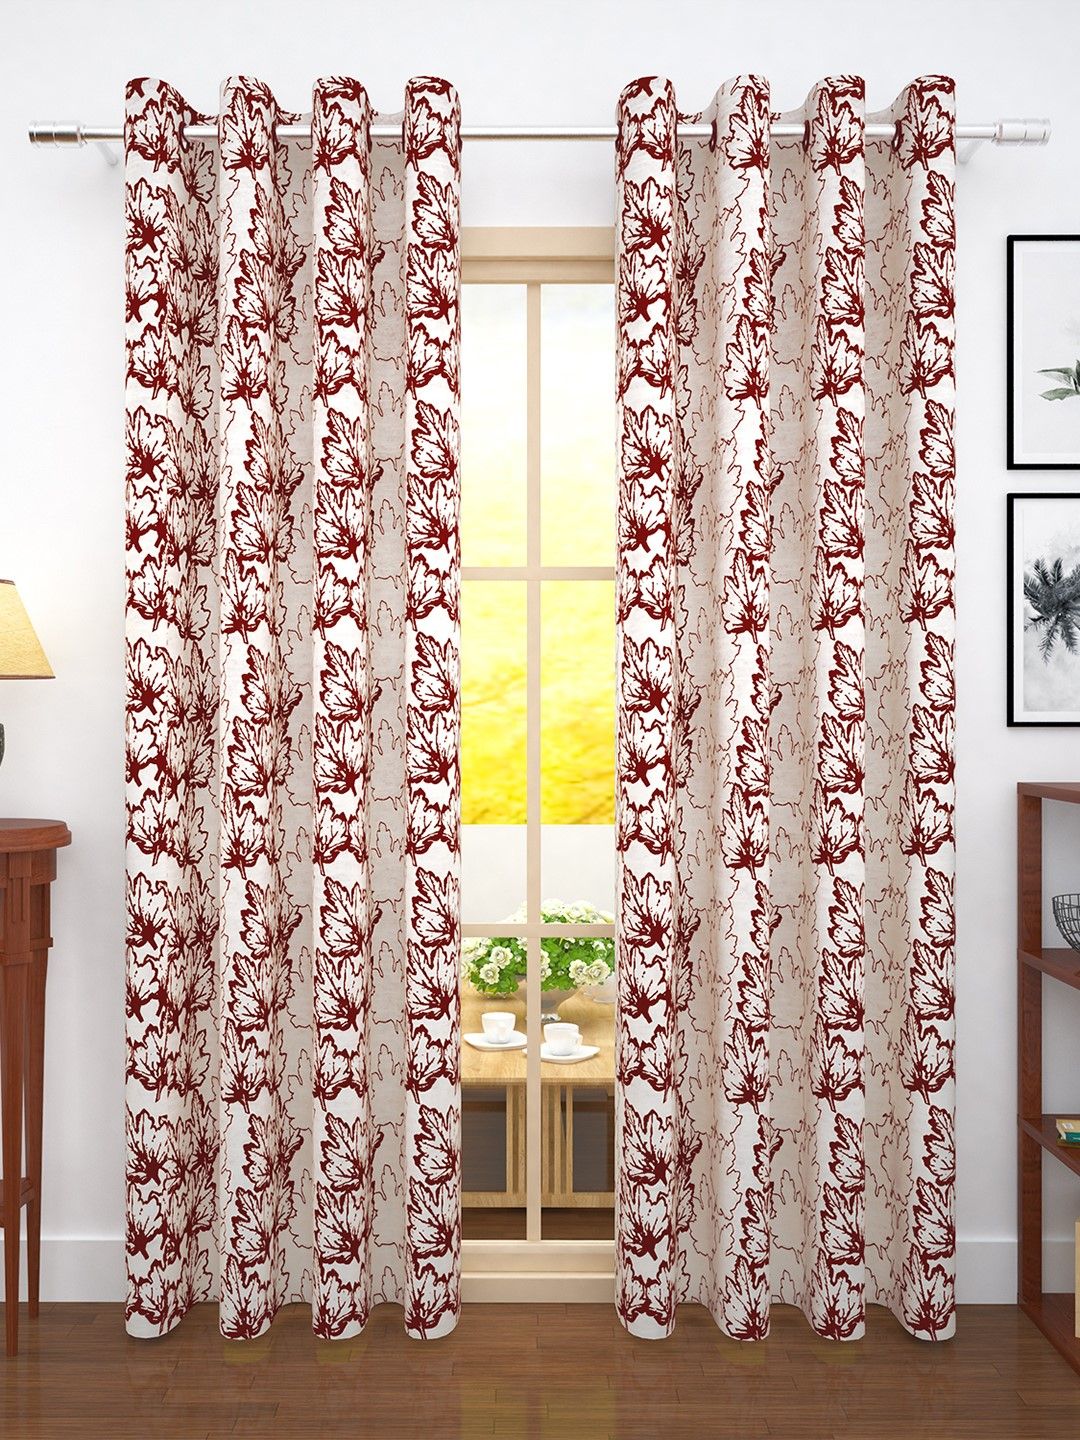 Story@home Cream-Coloured & Maroon Set of 2  300GSM Semi Blackout Jacquard Eyelet Ringtop Door Curtains Price in India